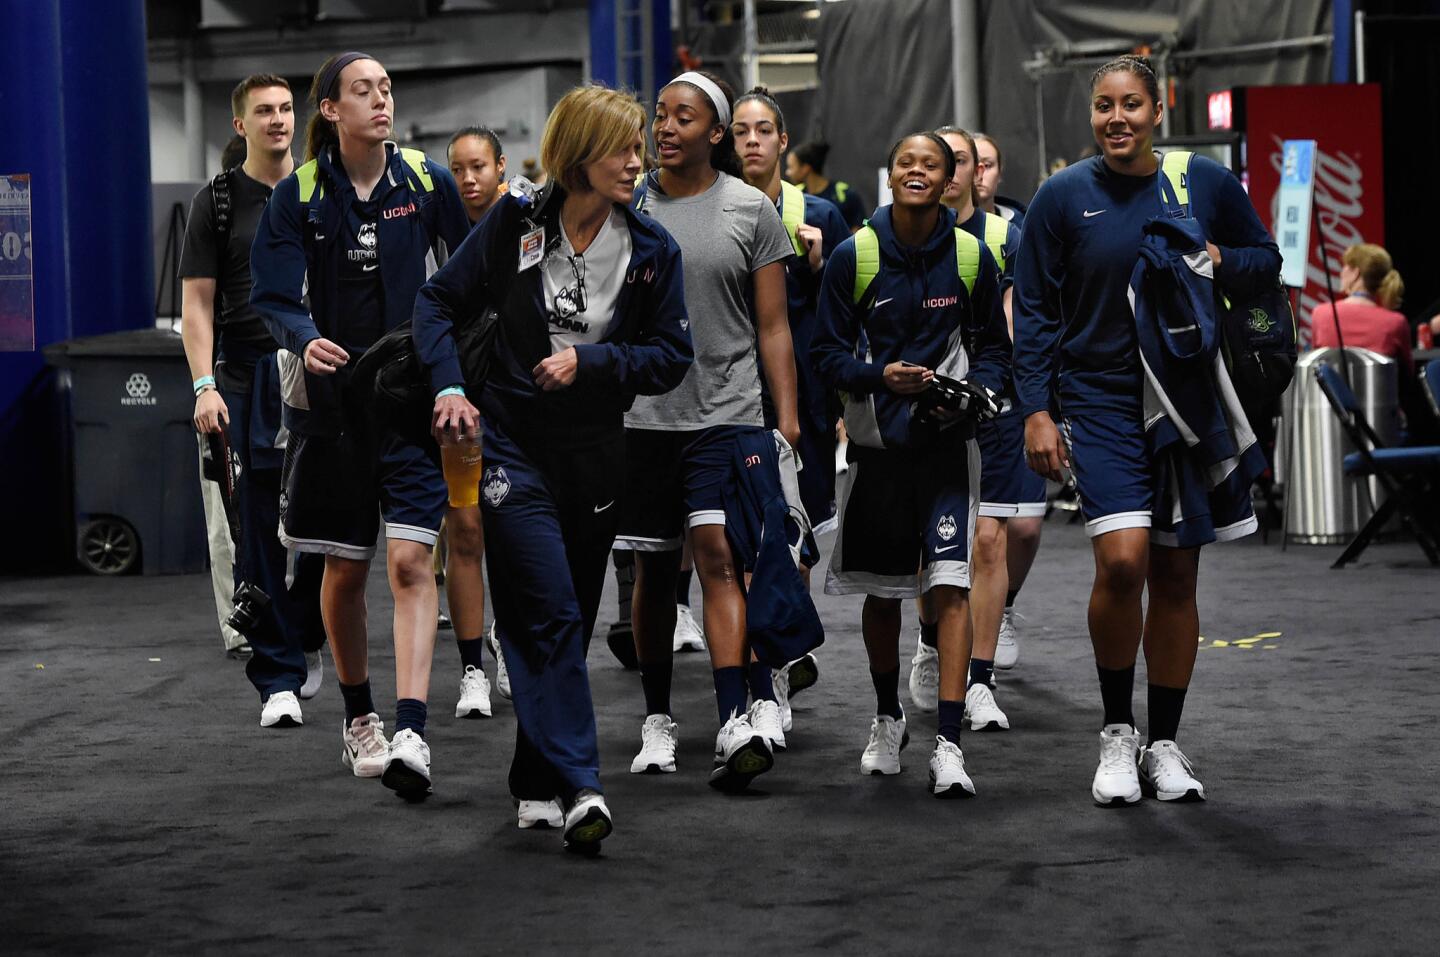 Led by associate head coach Chris Dailey, the UConn women arrive at the Amalie Arena Monday for news conference, interviews and practice. UConn will meet Notre Dame in the NCAA Championship game on Tuesday.